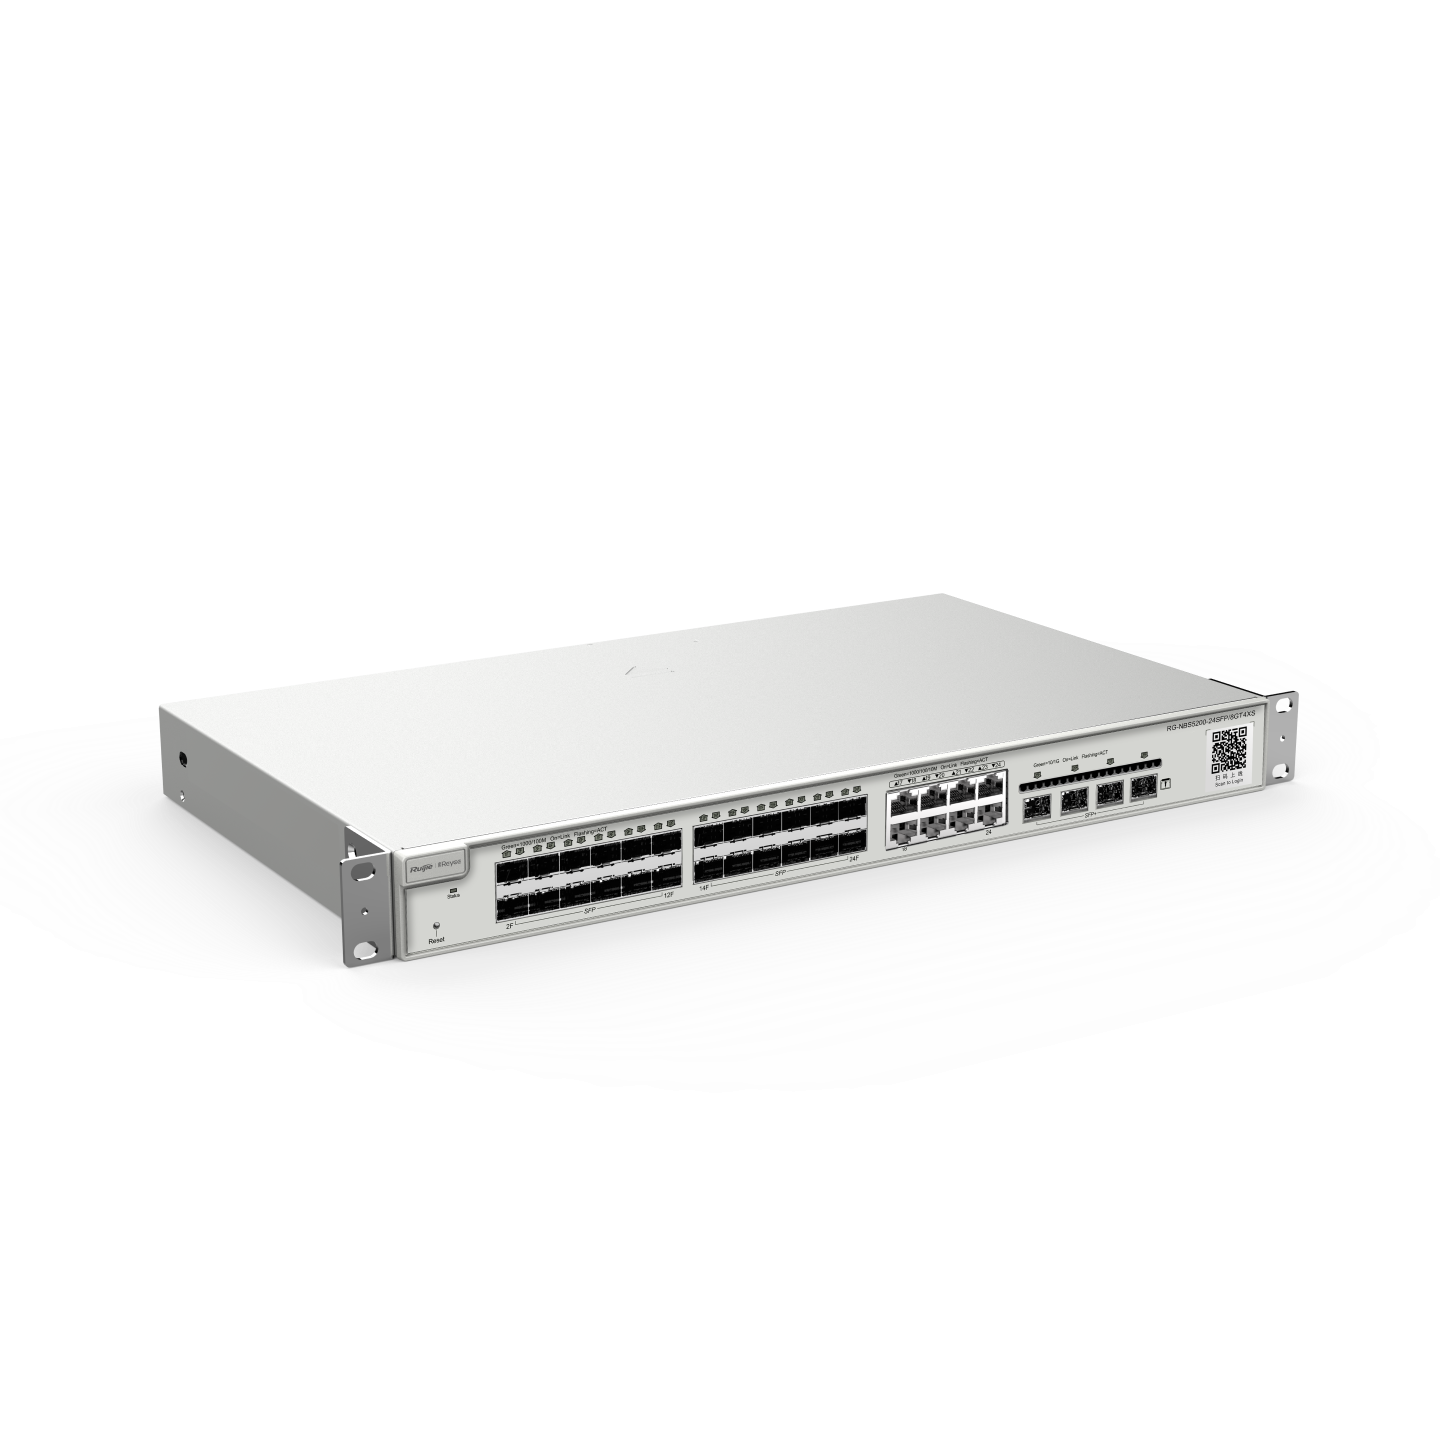 RG-NBS5200-24SFP/8GT4XS with 8 Combo ports with 4 SFP+ uplink, Layer 3, Cloud Managed